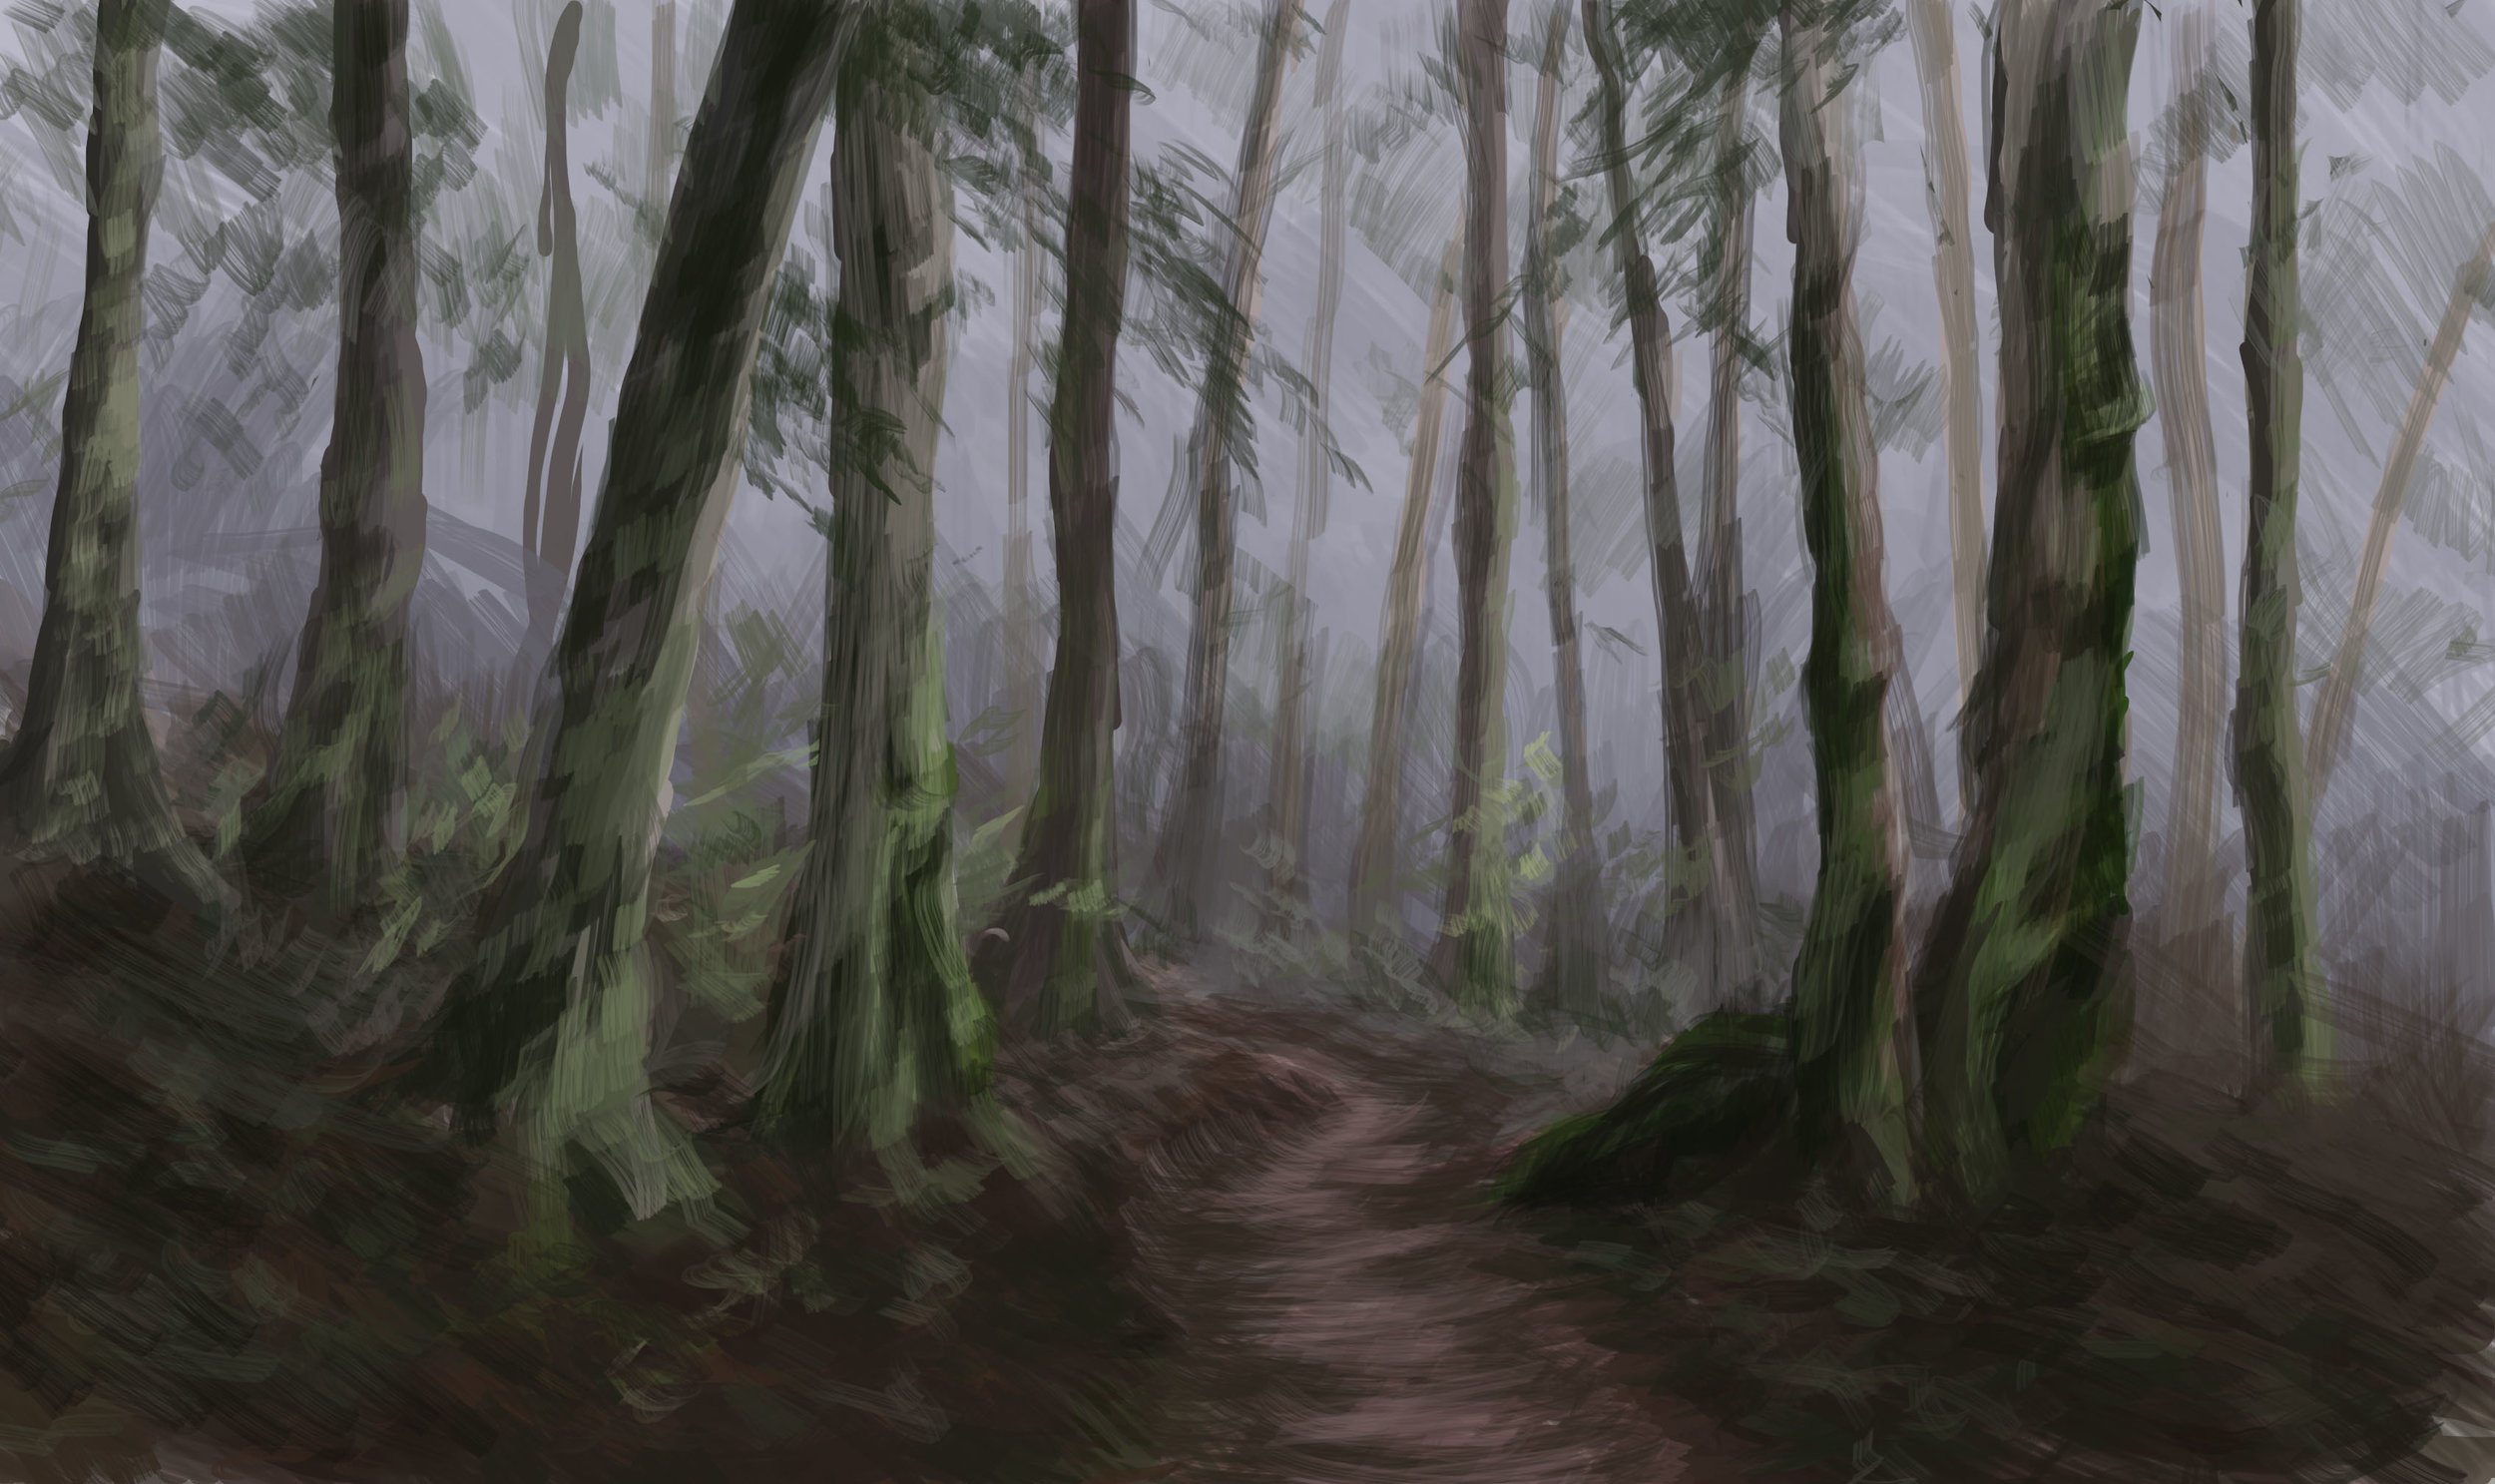  Dreary Forest Environment